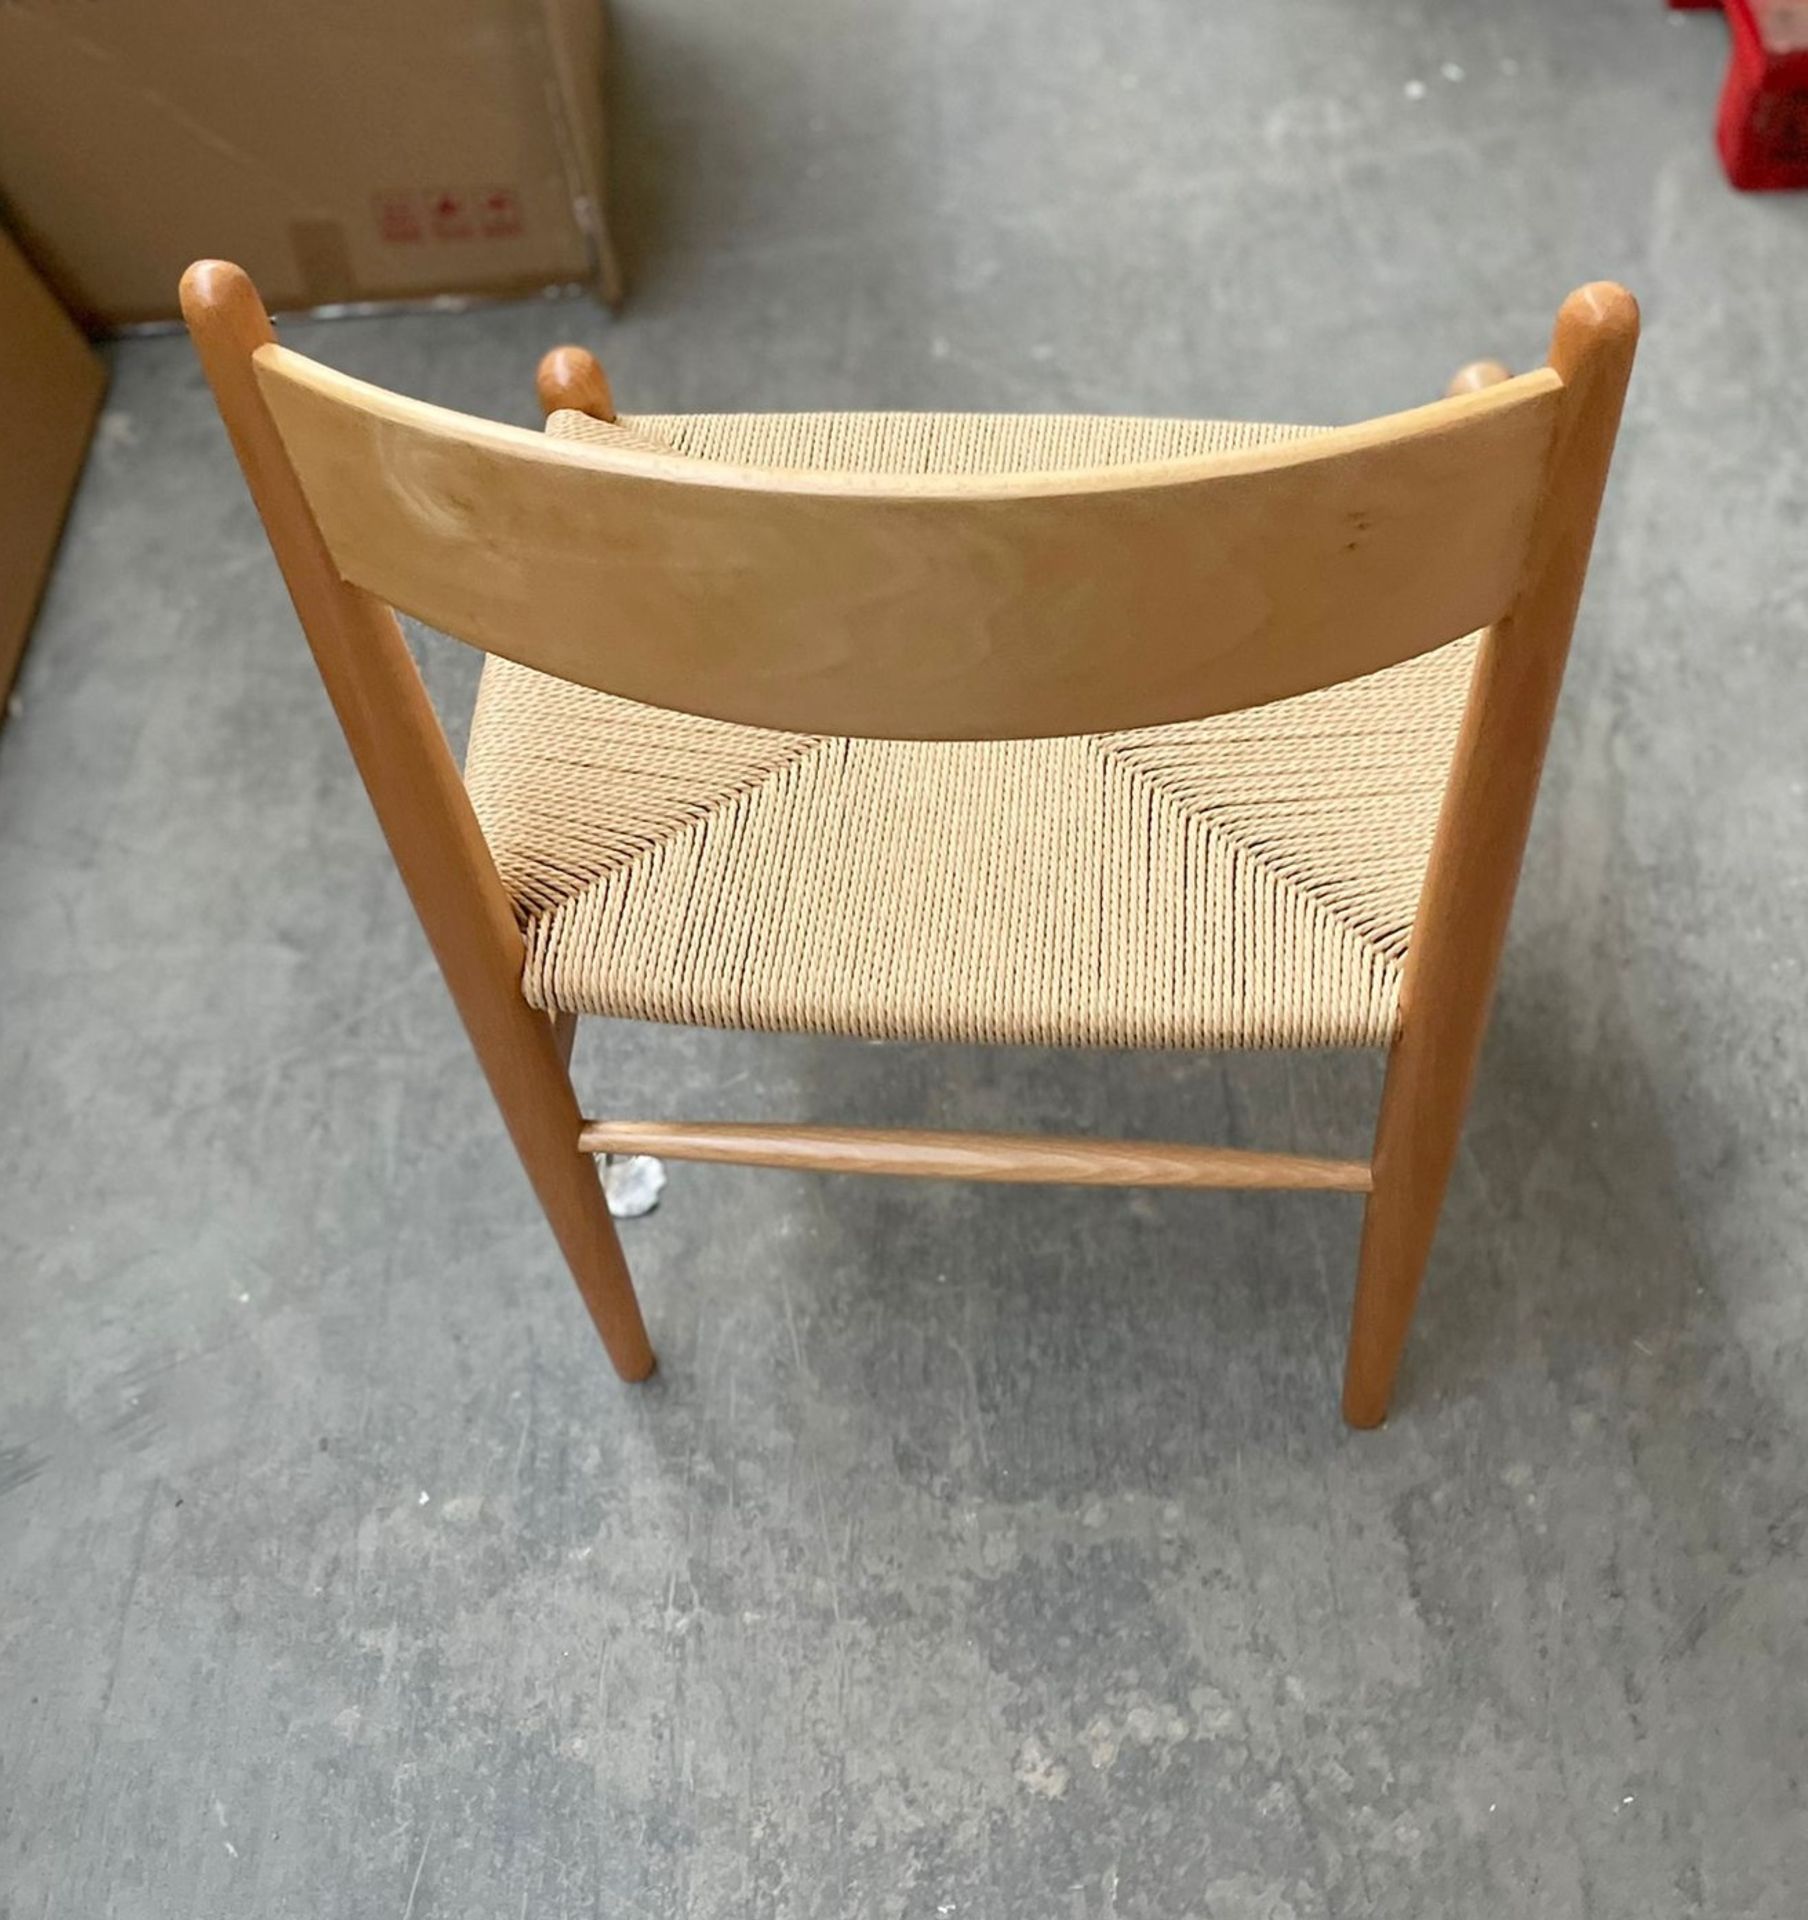 2 x Nielsen  Natural + Natural Cord Chair - Dimensions: 50(h) x 48(d) x 53(w) cm  - Brand New - Image 5 of 5